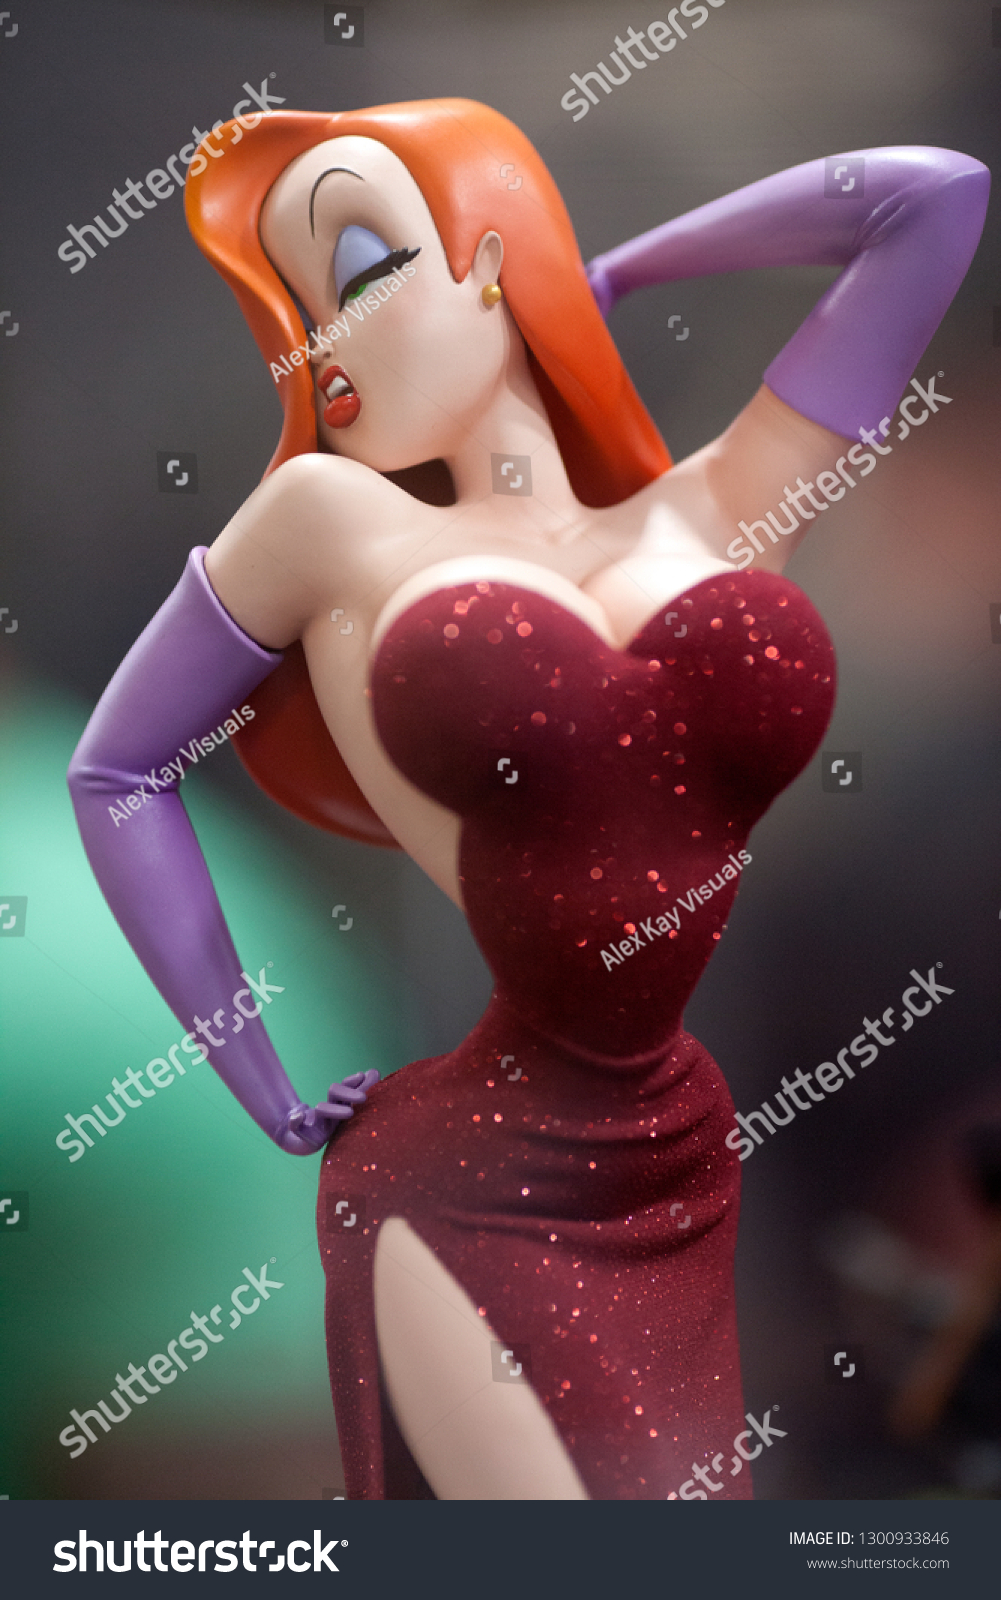 christine del real recommends jessica rabbit jolly roger pic